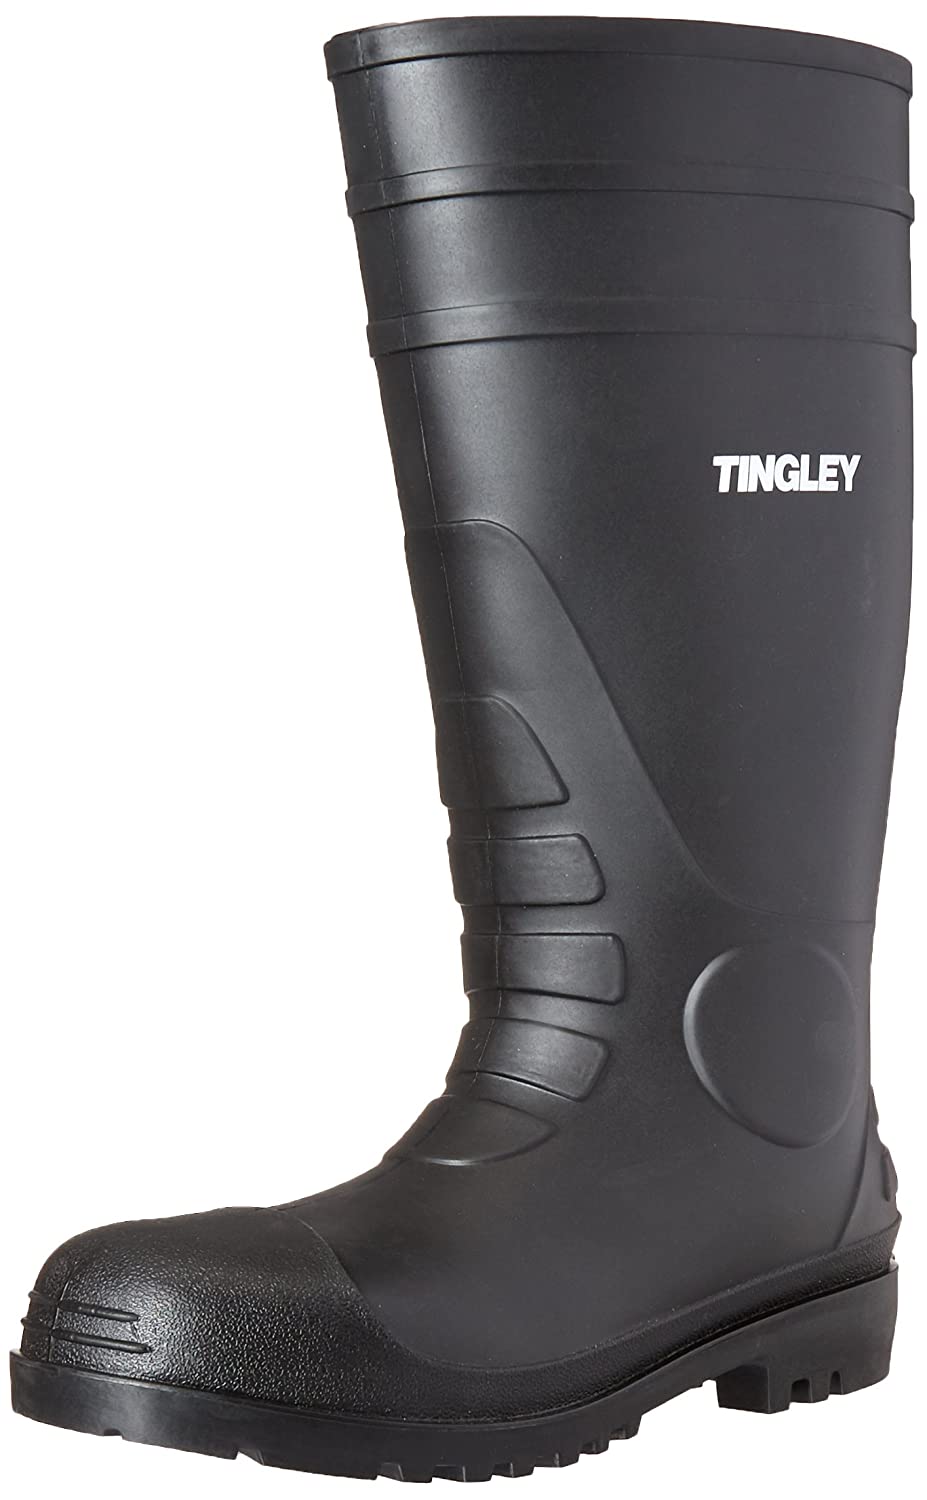 Tingley Cleated Flexible Men’s Rain Boots